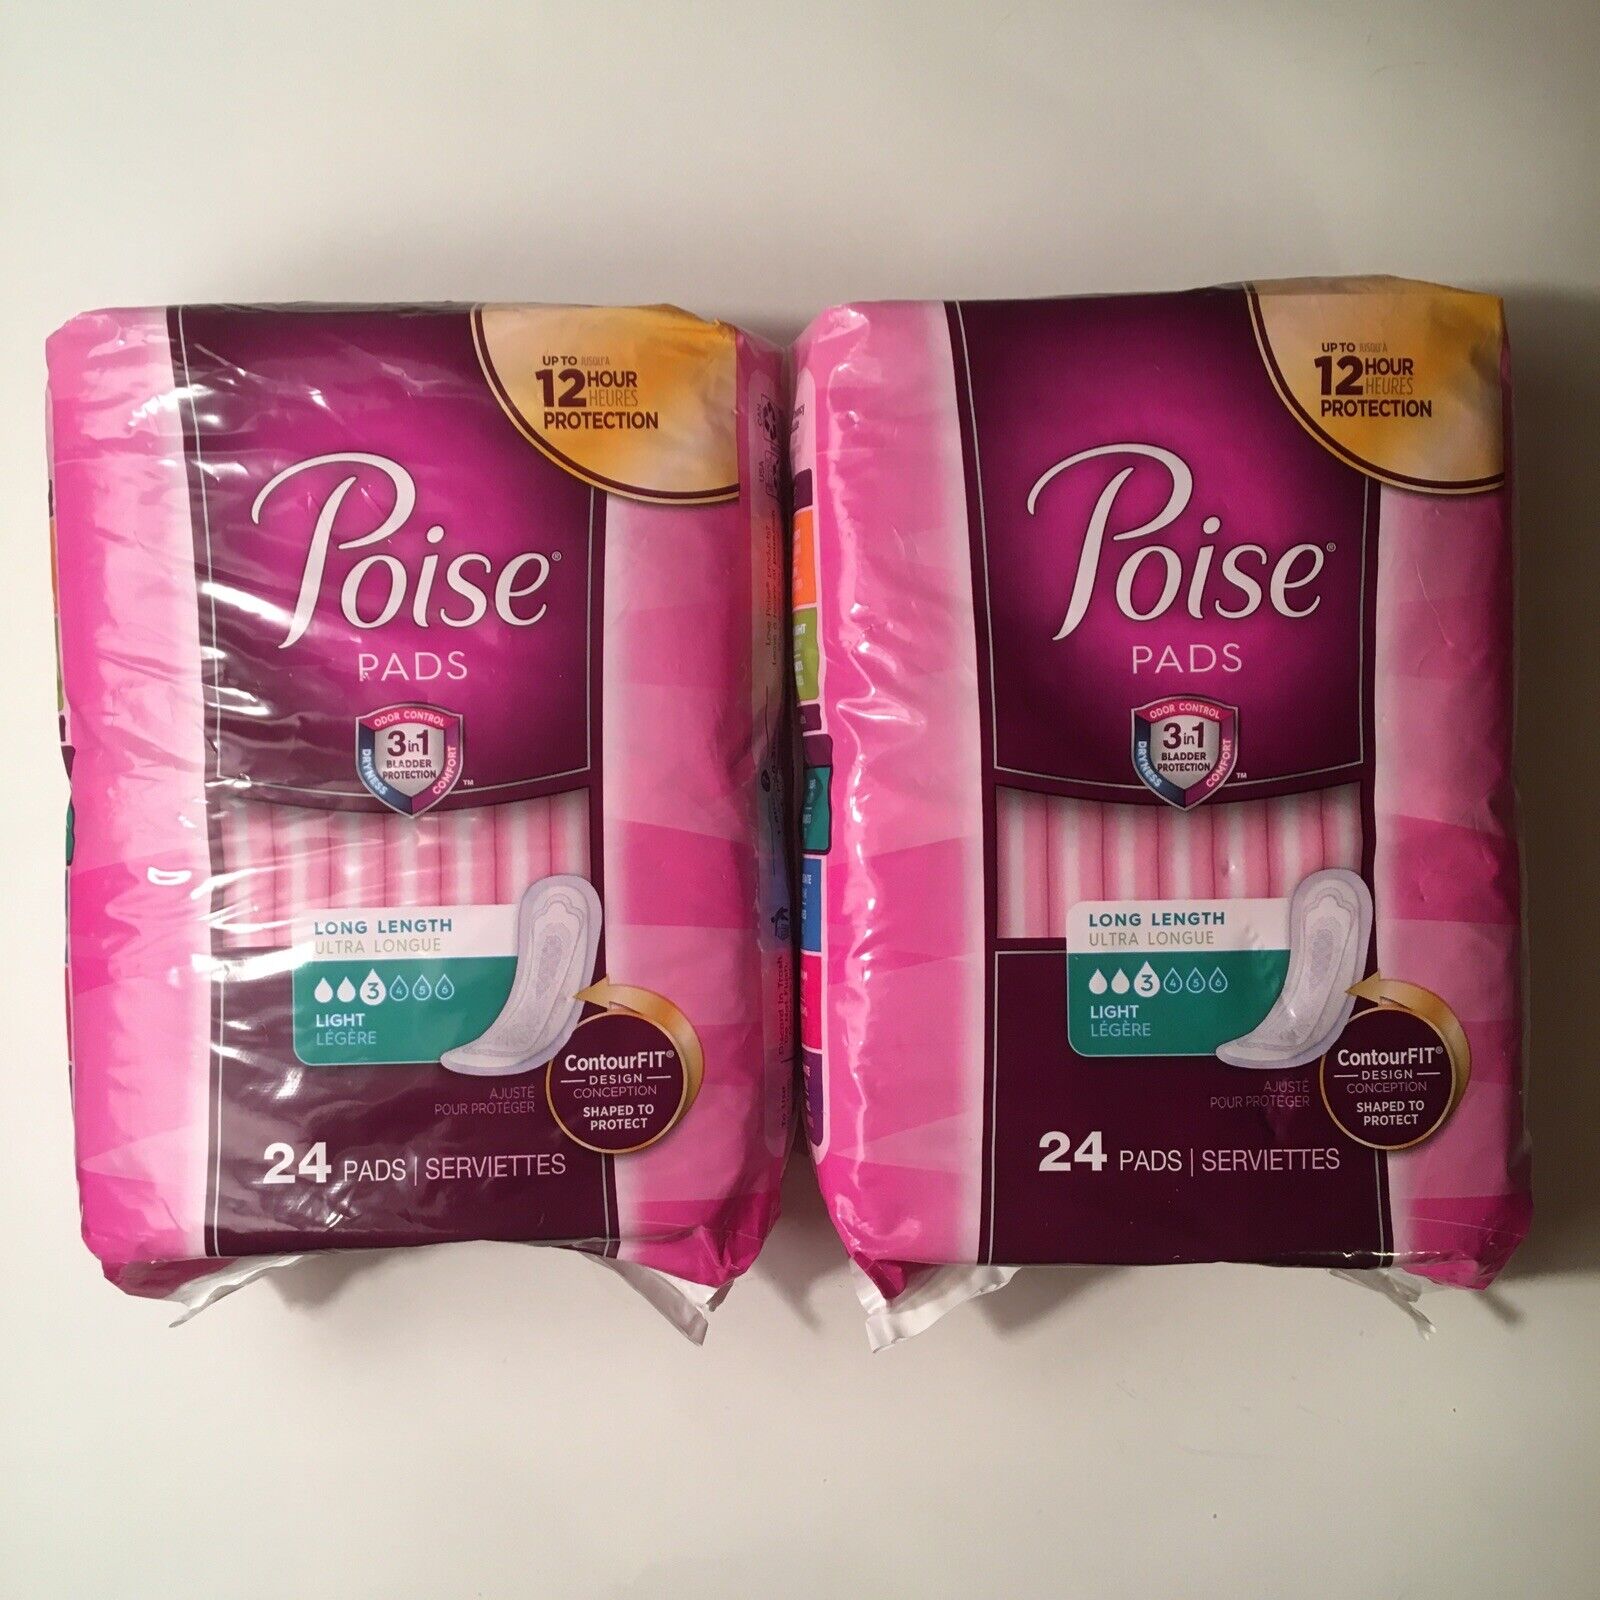 (2 PACKAGES) Poise Pads Long-Length #3 Light TOTAL 48 Pads